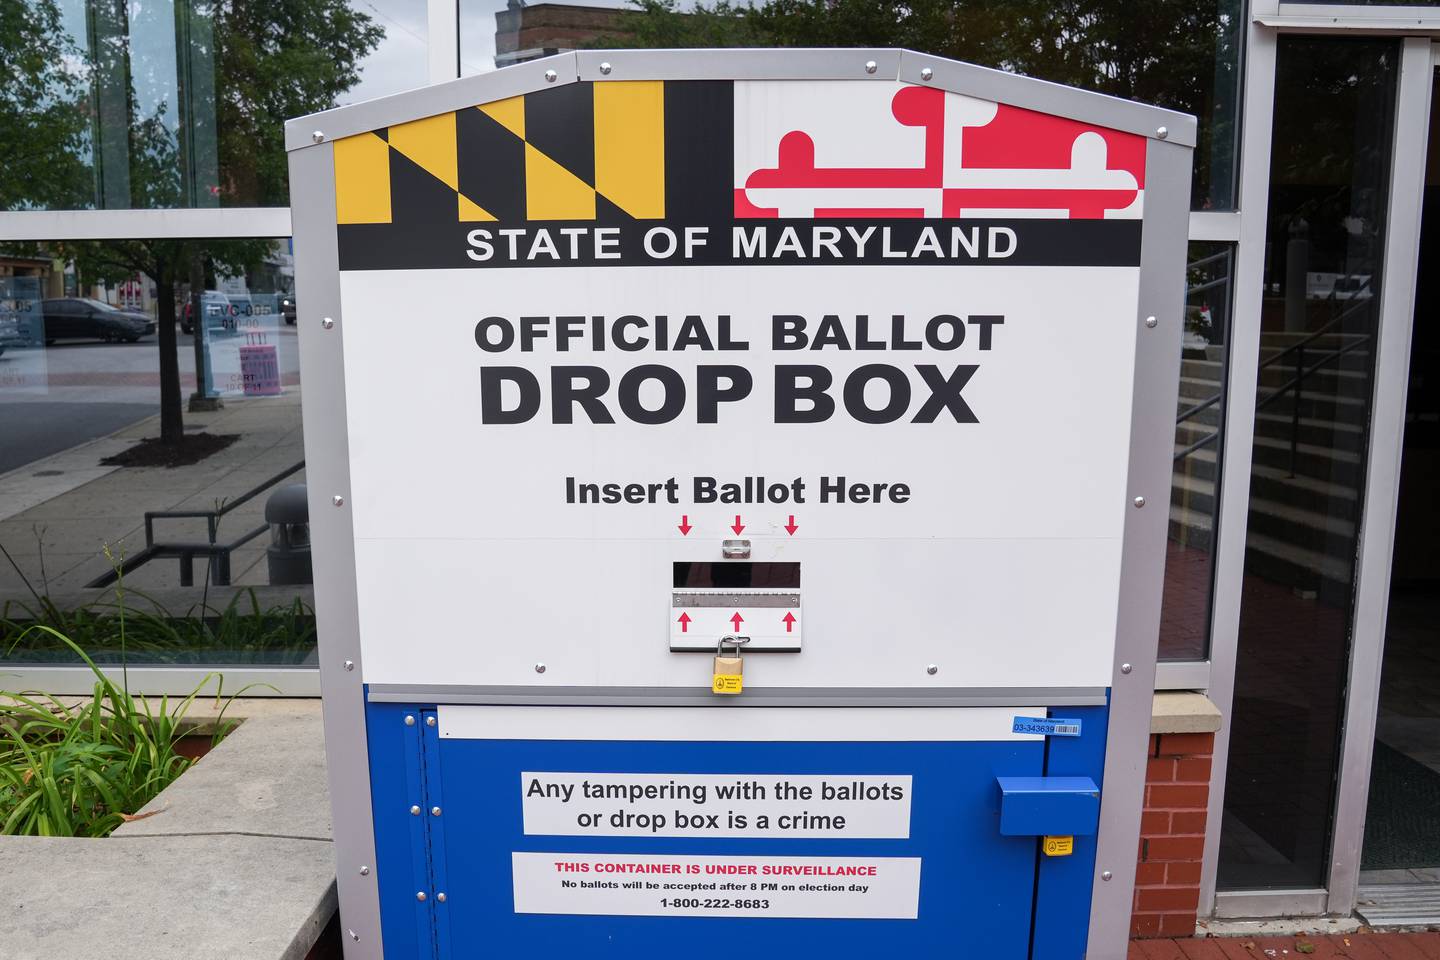 7/7/22—A State of Maryland official ballot drop box sits outside the Southeast Anchor Branch of the Enoch Pratt Free Library on the first day of early voting in Maryland’s Primary Election.